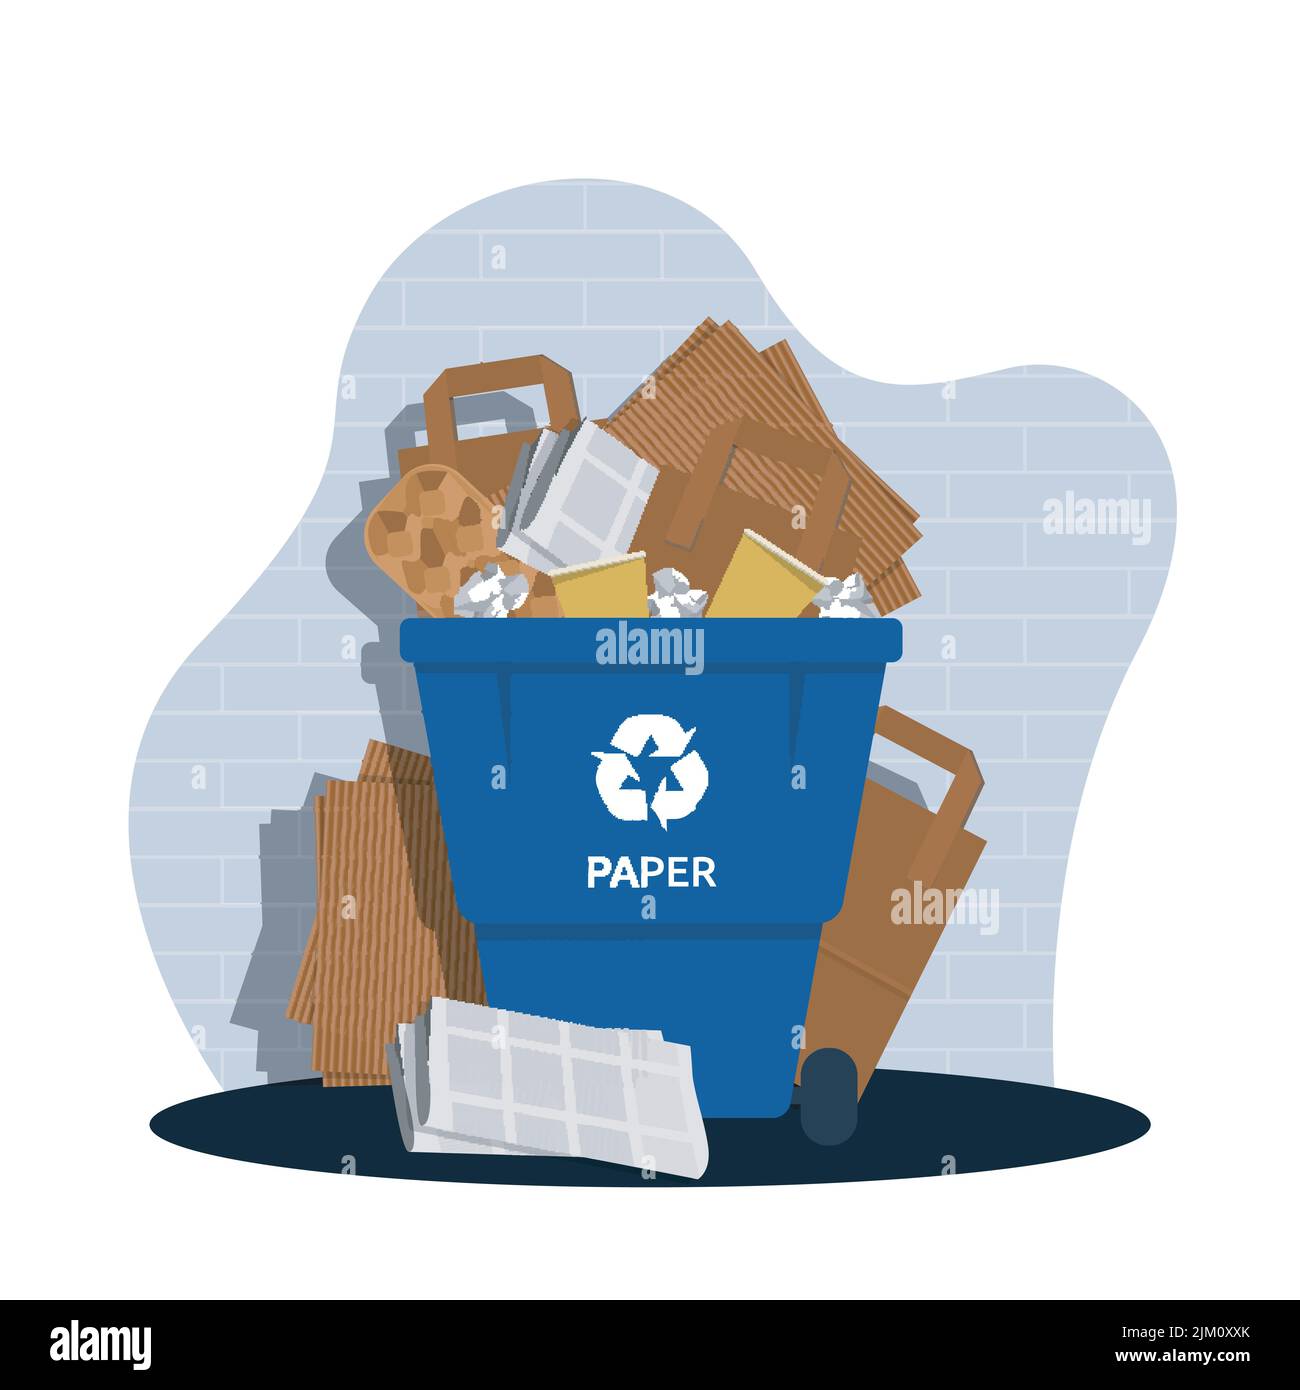 Paper Plastic Glass Can Box House Home Recycling Stuff Illustration Stock Vector